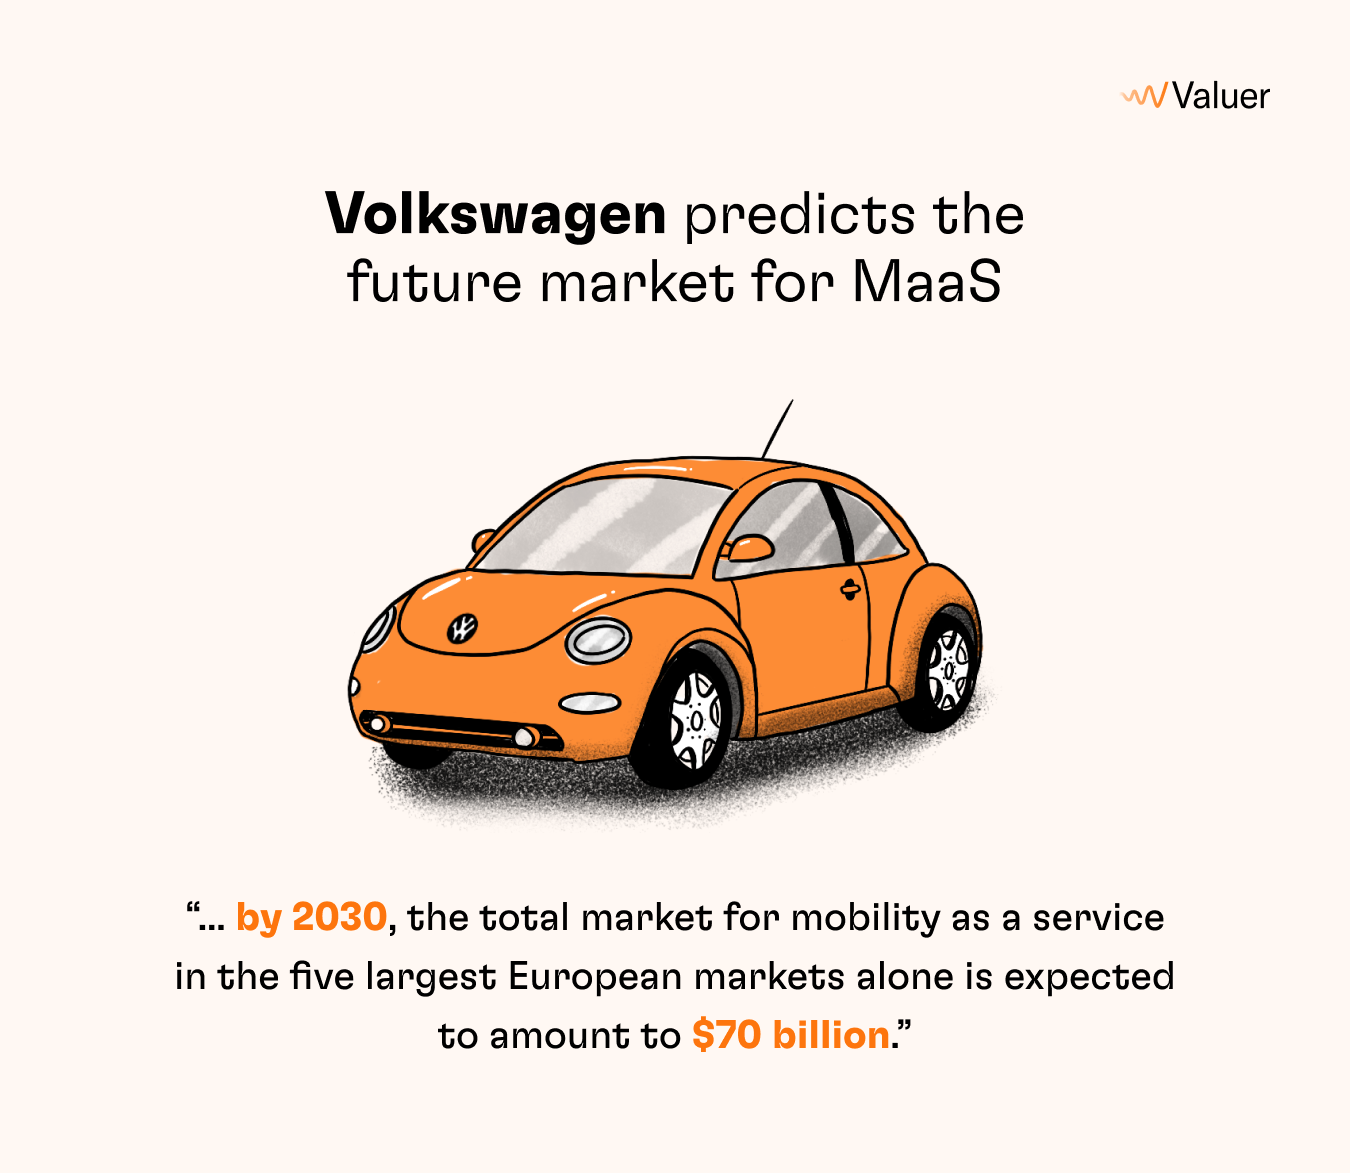 Volkswagen predicts the future market for MaaS